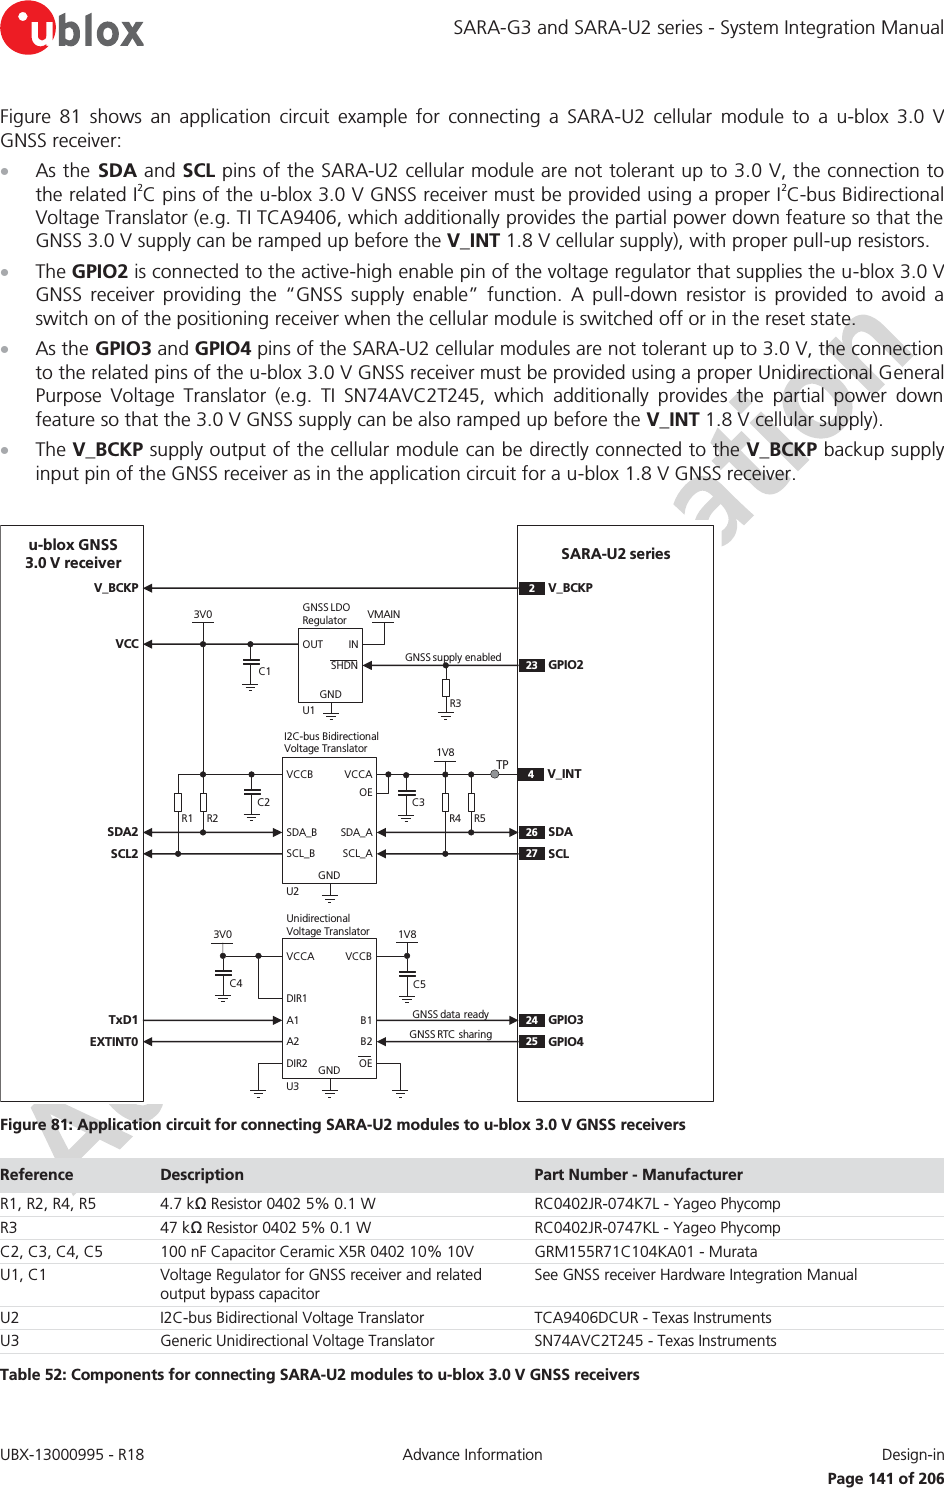 SARA-G3 and SARA-U2 series - System Integration Manual UBX-13000995 - R18  Advance Information  Design-in   Page 141 of 206 Figure 81 shows an application circuit example for connecting a SARA-U2 cellular module to a u-blox 3.0 V GNSS receiver: x As the SDA and SCL pins of the SARA-U2 cellular module are not tolerant up to 3.0 V, the connection to the related I2C pins of the u-blox 3.0 V GNSS receiver must be provided using a proper I2C-bus Bidirectional Voltage Translator (e.g. TI TCA9406, which additionally provides the partial power down feature so that the GNSS 3.0 V supply can be ramped up before the V_INT 1.8 V cellular supply), with proper pull-up resistors. x The GPIO2 is connected to the active-high enable pin of the voltage regulator that supplies the u-blox 3.0 V GNSS receiver providing the “GNSS supply enable” function. A pull-down resistor is provided to avoid a switch on of the positioning receiver when the cellular module is switched off or in the reset state. x As the GPIO3 and GPIO4 pins of the SARA-U2 cellular modules are not tolerant up to 3.0 V, the connection to the related pins of the u-blox 3.0 V GNSS receiver must be provided using a proper Unidirectional General Purpose Voltage Translator (e.g. TI SN74AVC2T245, which additionally provides the partial power down feature so that the 3.0 V GNSS supply can be also ramped up before the V_INT 1.8 V cellular supply). x The V_BCKP supply output of the cellular module can be directly connected to the V_BCKP backup supply input pin of the GNSS receiver as in the application circuit for a u-blox 1.8 V GNSS receiver.  SARA-U2 seriesu-blox GNSS 3.0 V receiver24 GPIO325 GPIO41V8B1 A1GNDU3B2A2VCCBVCCAUnidirectionalVoltage TranslatorC4 C53V0TxD1EXTINT0R1INOUTGNDGNSS LDORegulatorSHDNR2VMAIN3V0U123 GPIO226 SDA27 SCLR4 R51V8SDA_A SDA_BGNDU2SCL_ASCL_BVCCAVCCBI2C-bus Bidirectional Voltage Translator4V_INTC1C2 C3R3SDA2SCL2VCCDIR1DIR22V_BCKPV_BCKPOEOEGNSS data  readyGNSS RTC sharingGNSS supply enabledTP Figure 81: Application circuit for connecting SARA-U2 modules to u-blox 3.0 V GNSS receivers Reference  Description  Part Number - Manufacturer R1, R2, R4, R5 4.7 kΩ Resistor 0402 5% 0.1 W  RC0402JR-074K7L - Yageo Phycomp R3 47 kΩ Resistor 0402 5% 0.1 W  RC0402JR-0747KL - Yageo Phycomp C2, C3, C4, C5 100 nF Capacitor Ceramic X5R 0402 10% 10V GRM155R71C104KA01 - Murata U1, C1 Voltage Regulator for GNSS receiver and related output bypass capacitor See GNSS receiver Hardware Integration Manual U2 I2C-bus Bidirectional Voltage Translator TCA9406DCUR - Texas Instruments U3 Generic Unidirectional Voltage Translator SN74AVC2T245 - Texas Instruments Table 52: Components for connecting SARA-U2 modules to u-blox 3.0 V GNSS receivers 